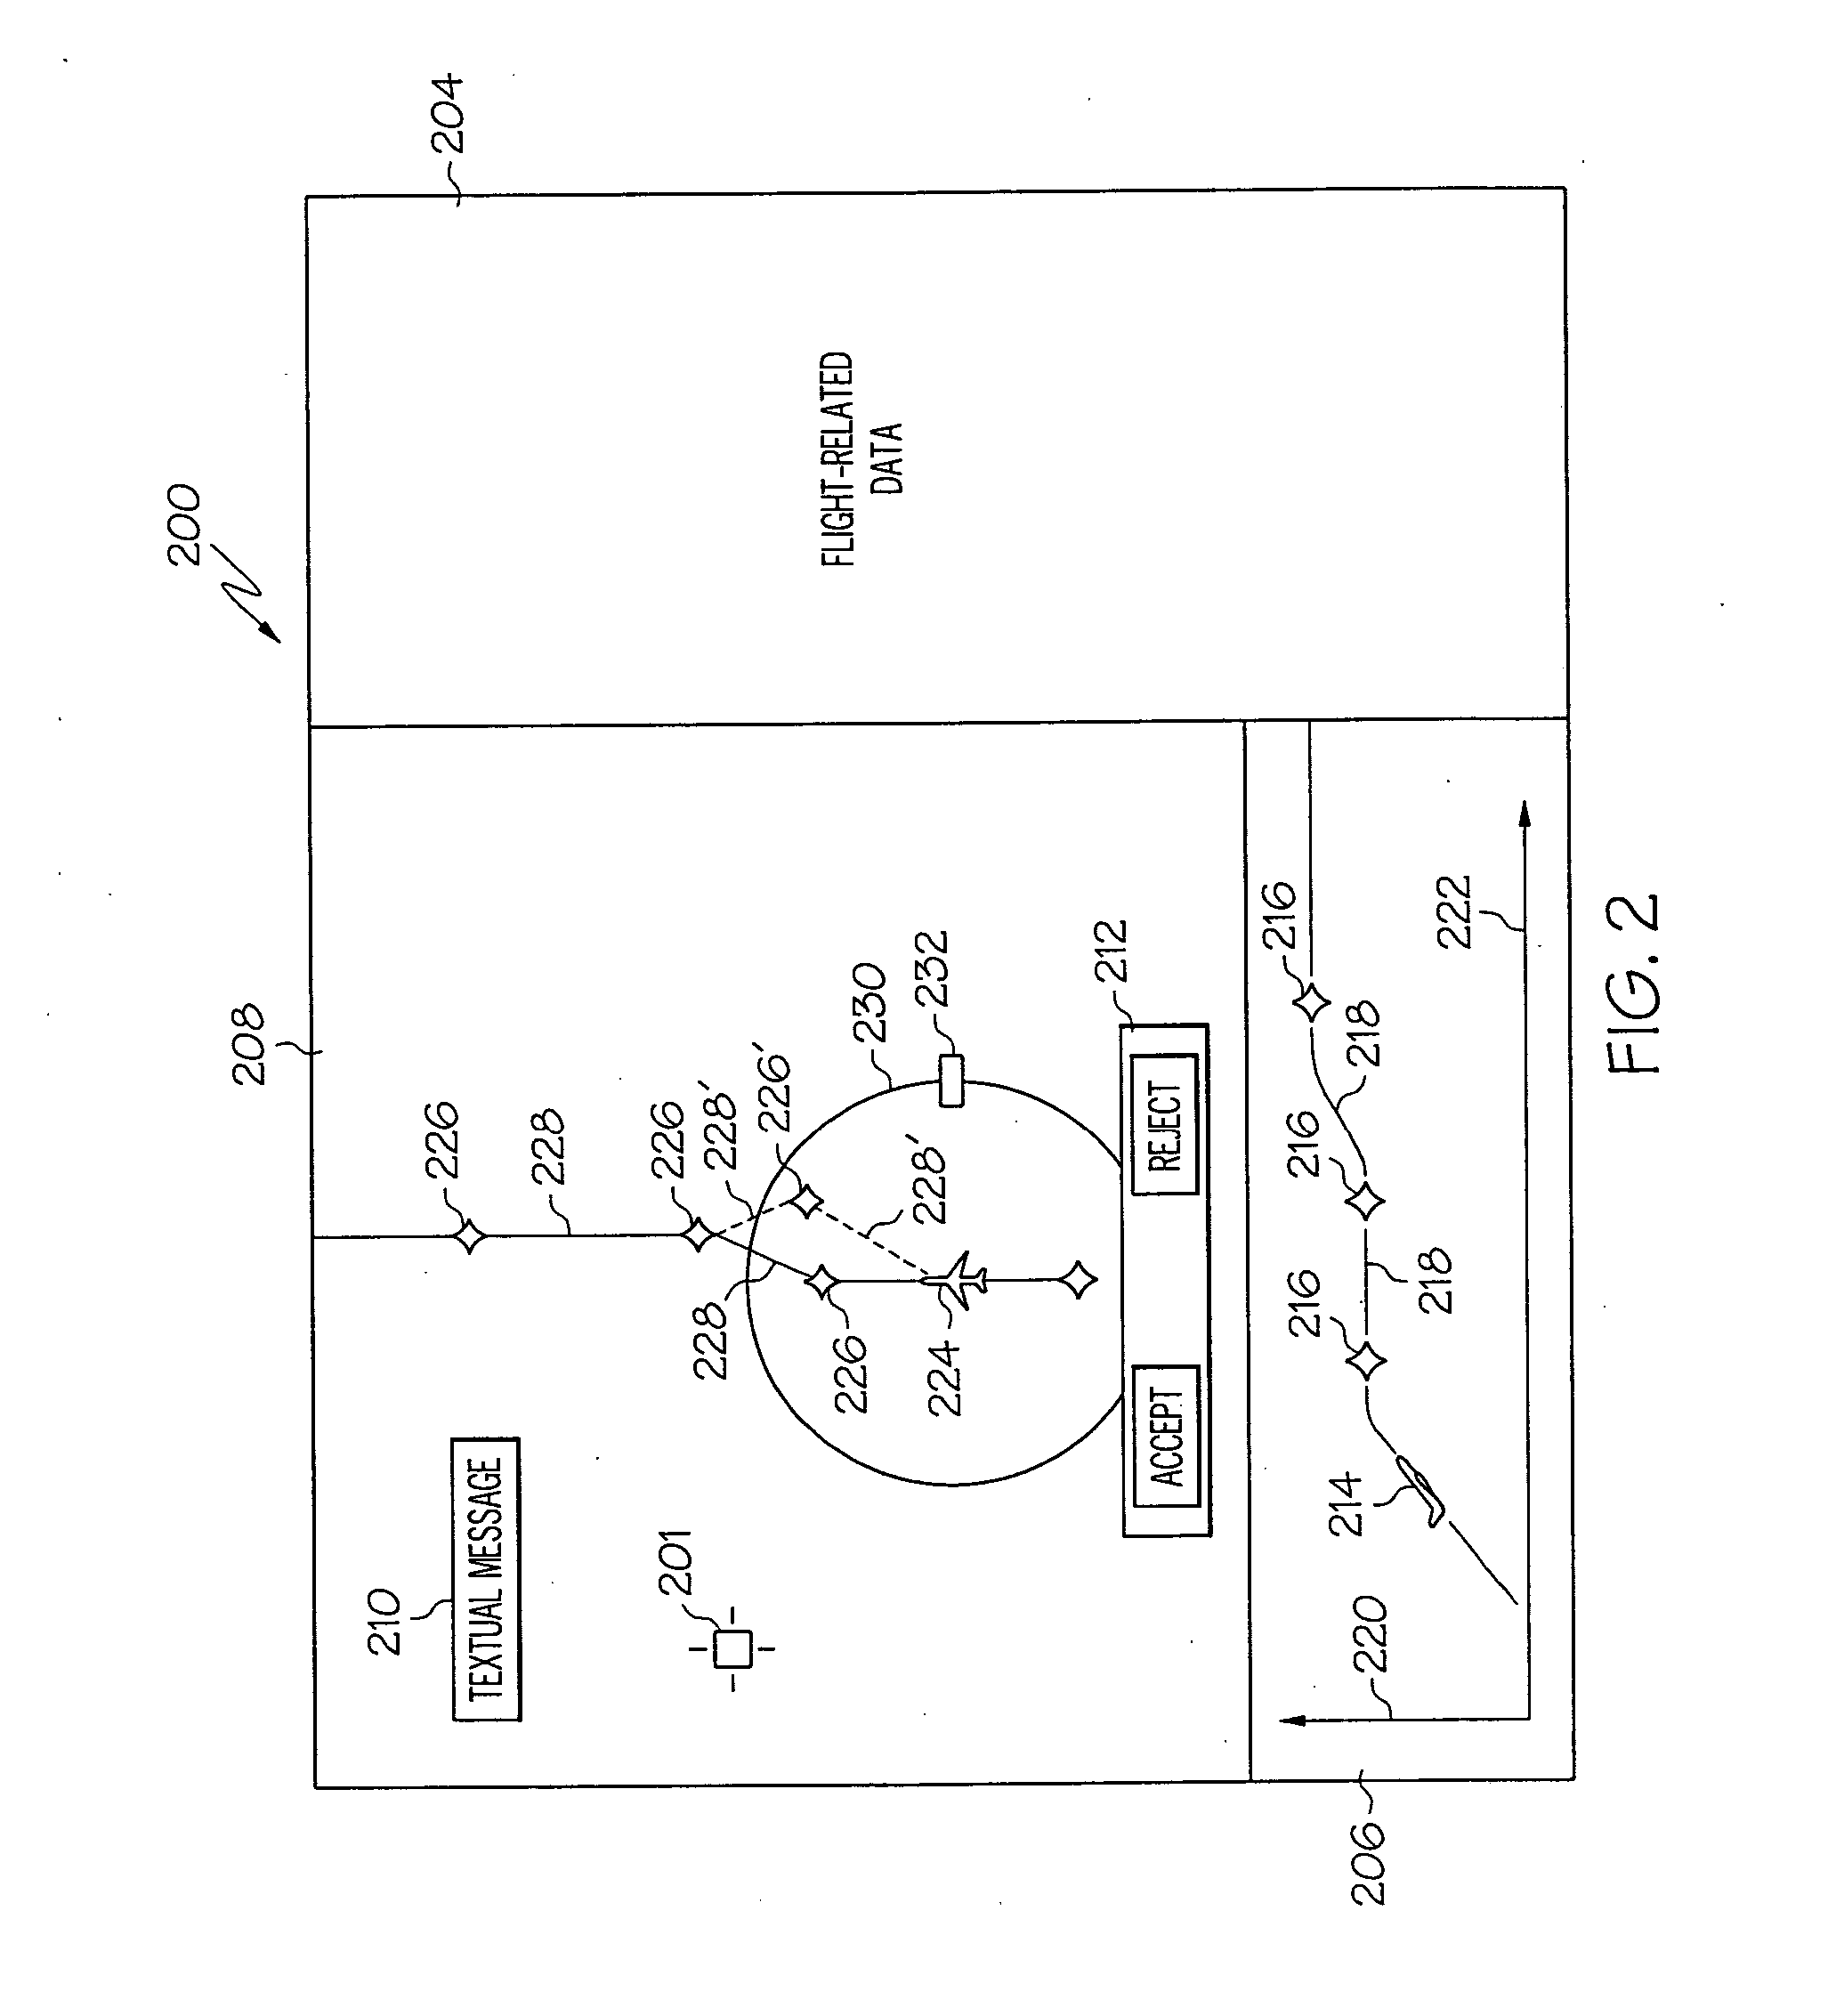 Integrated flight management and textual air traffic control display system and method